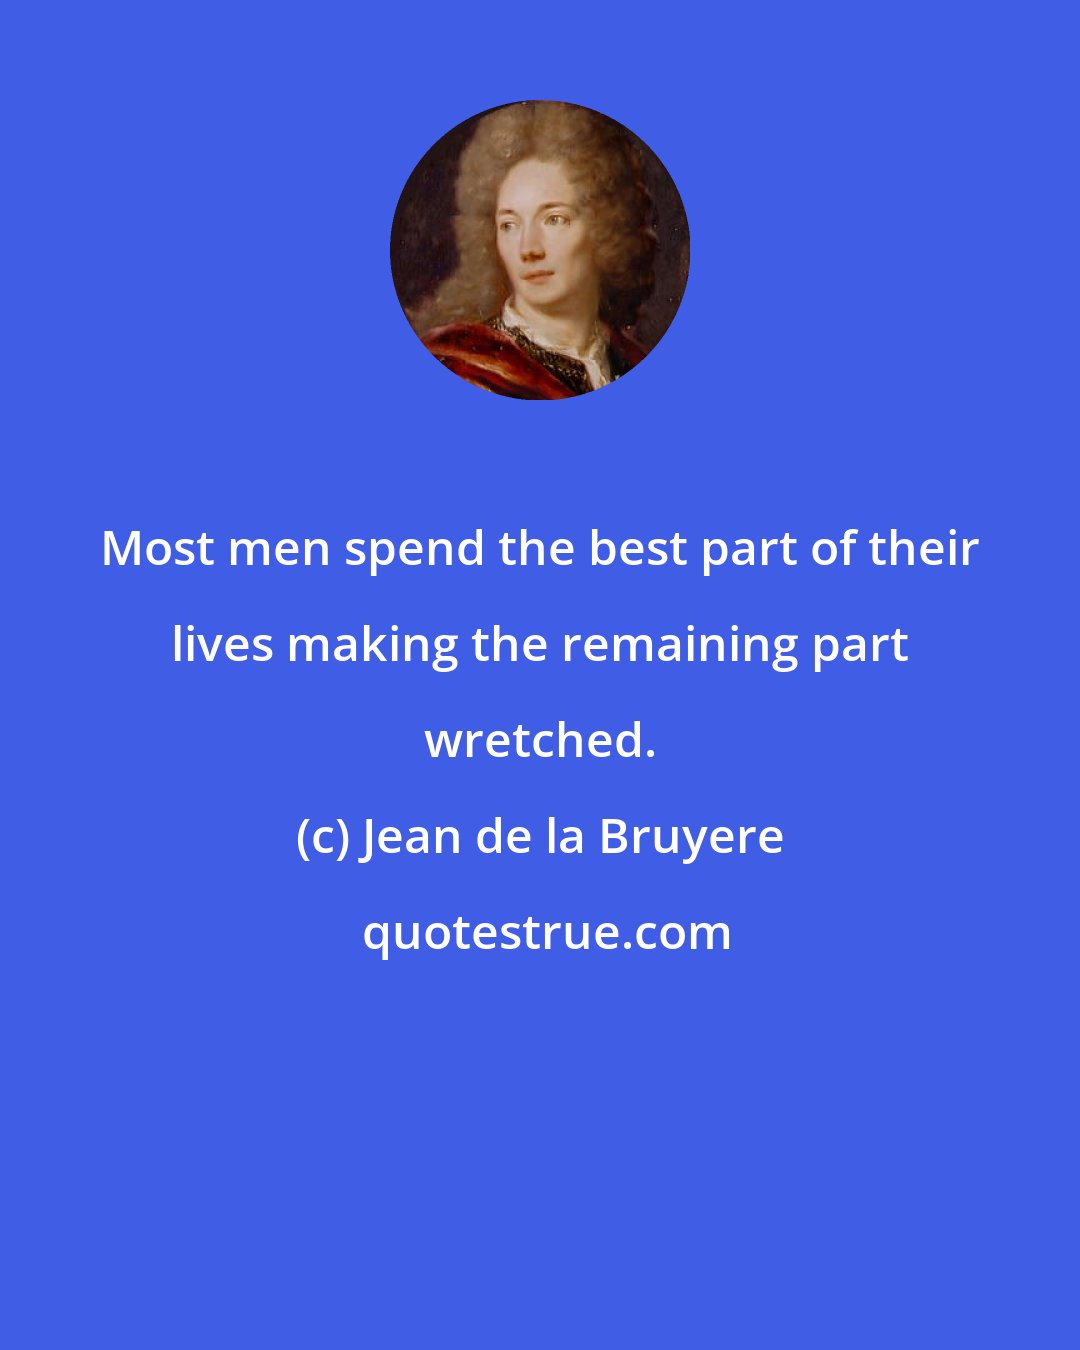 Jean de la Bruyere: Most men spend the best part of their lives making the remaining part wretched.